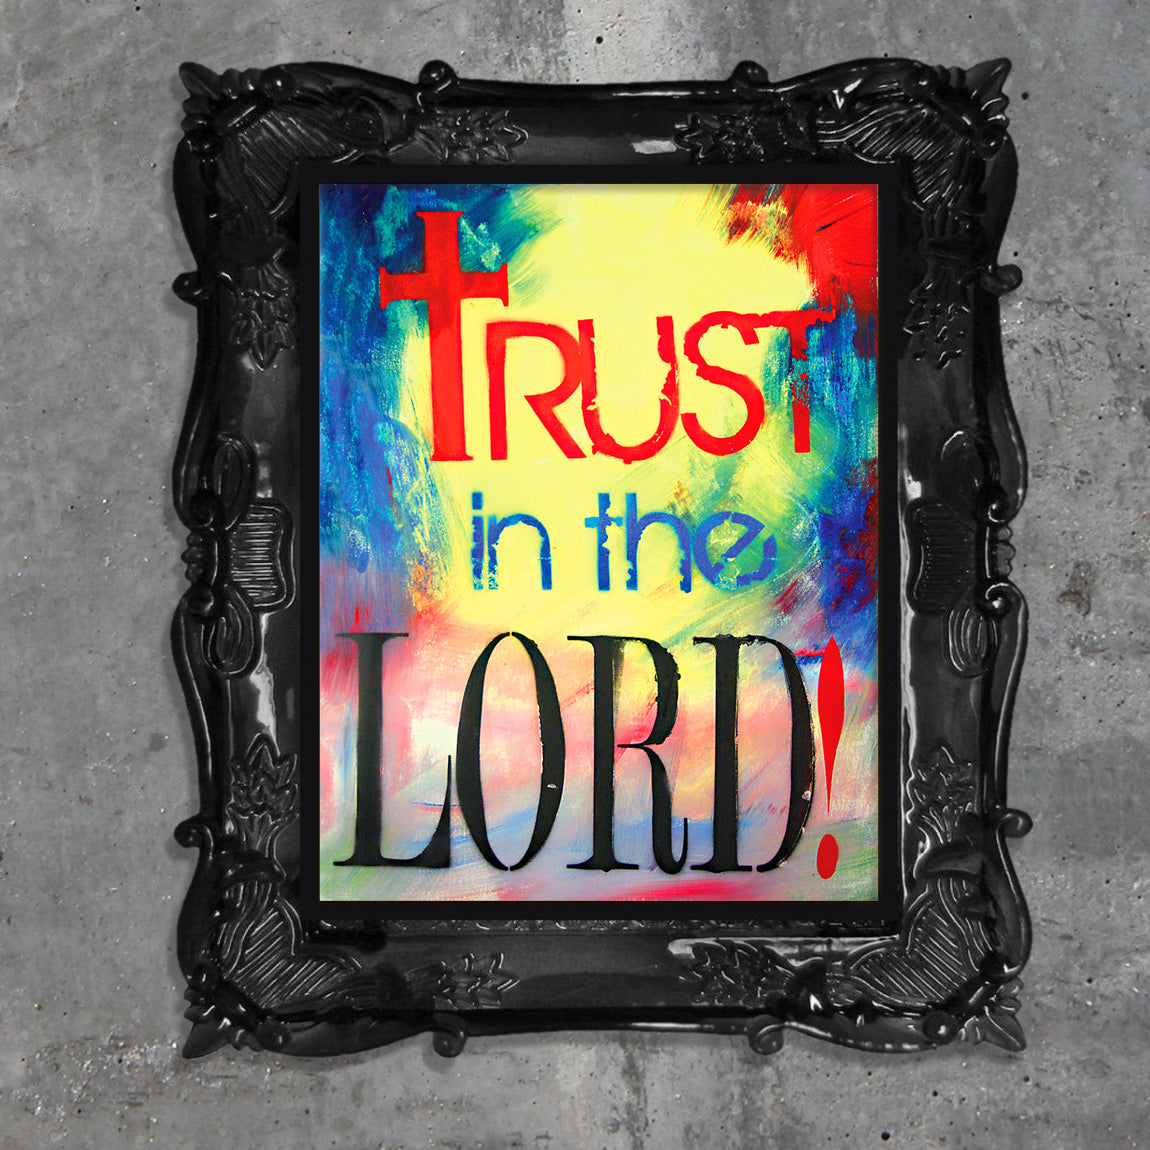 Trust in the Lord!